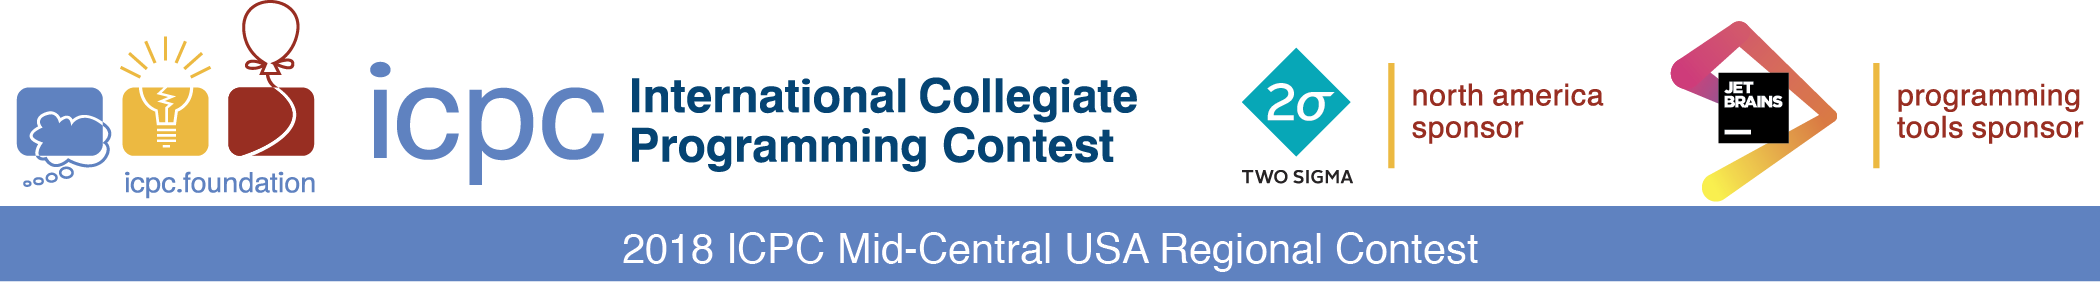 Mid-Central USA Programming Contest 2018